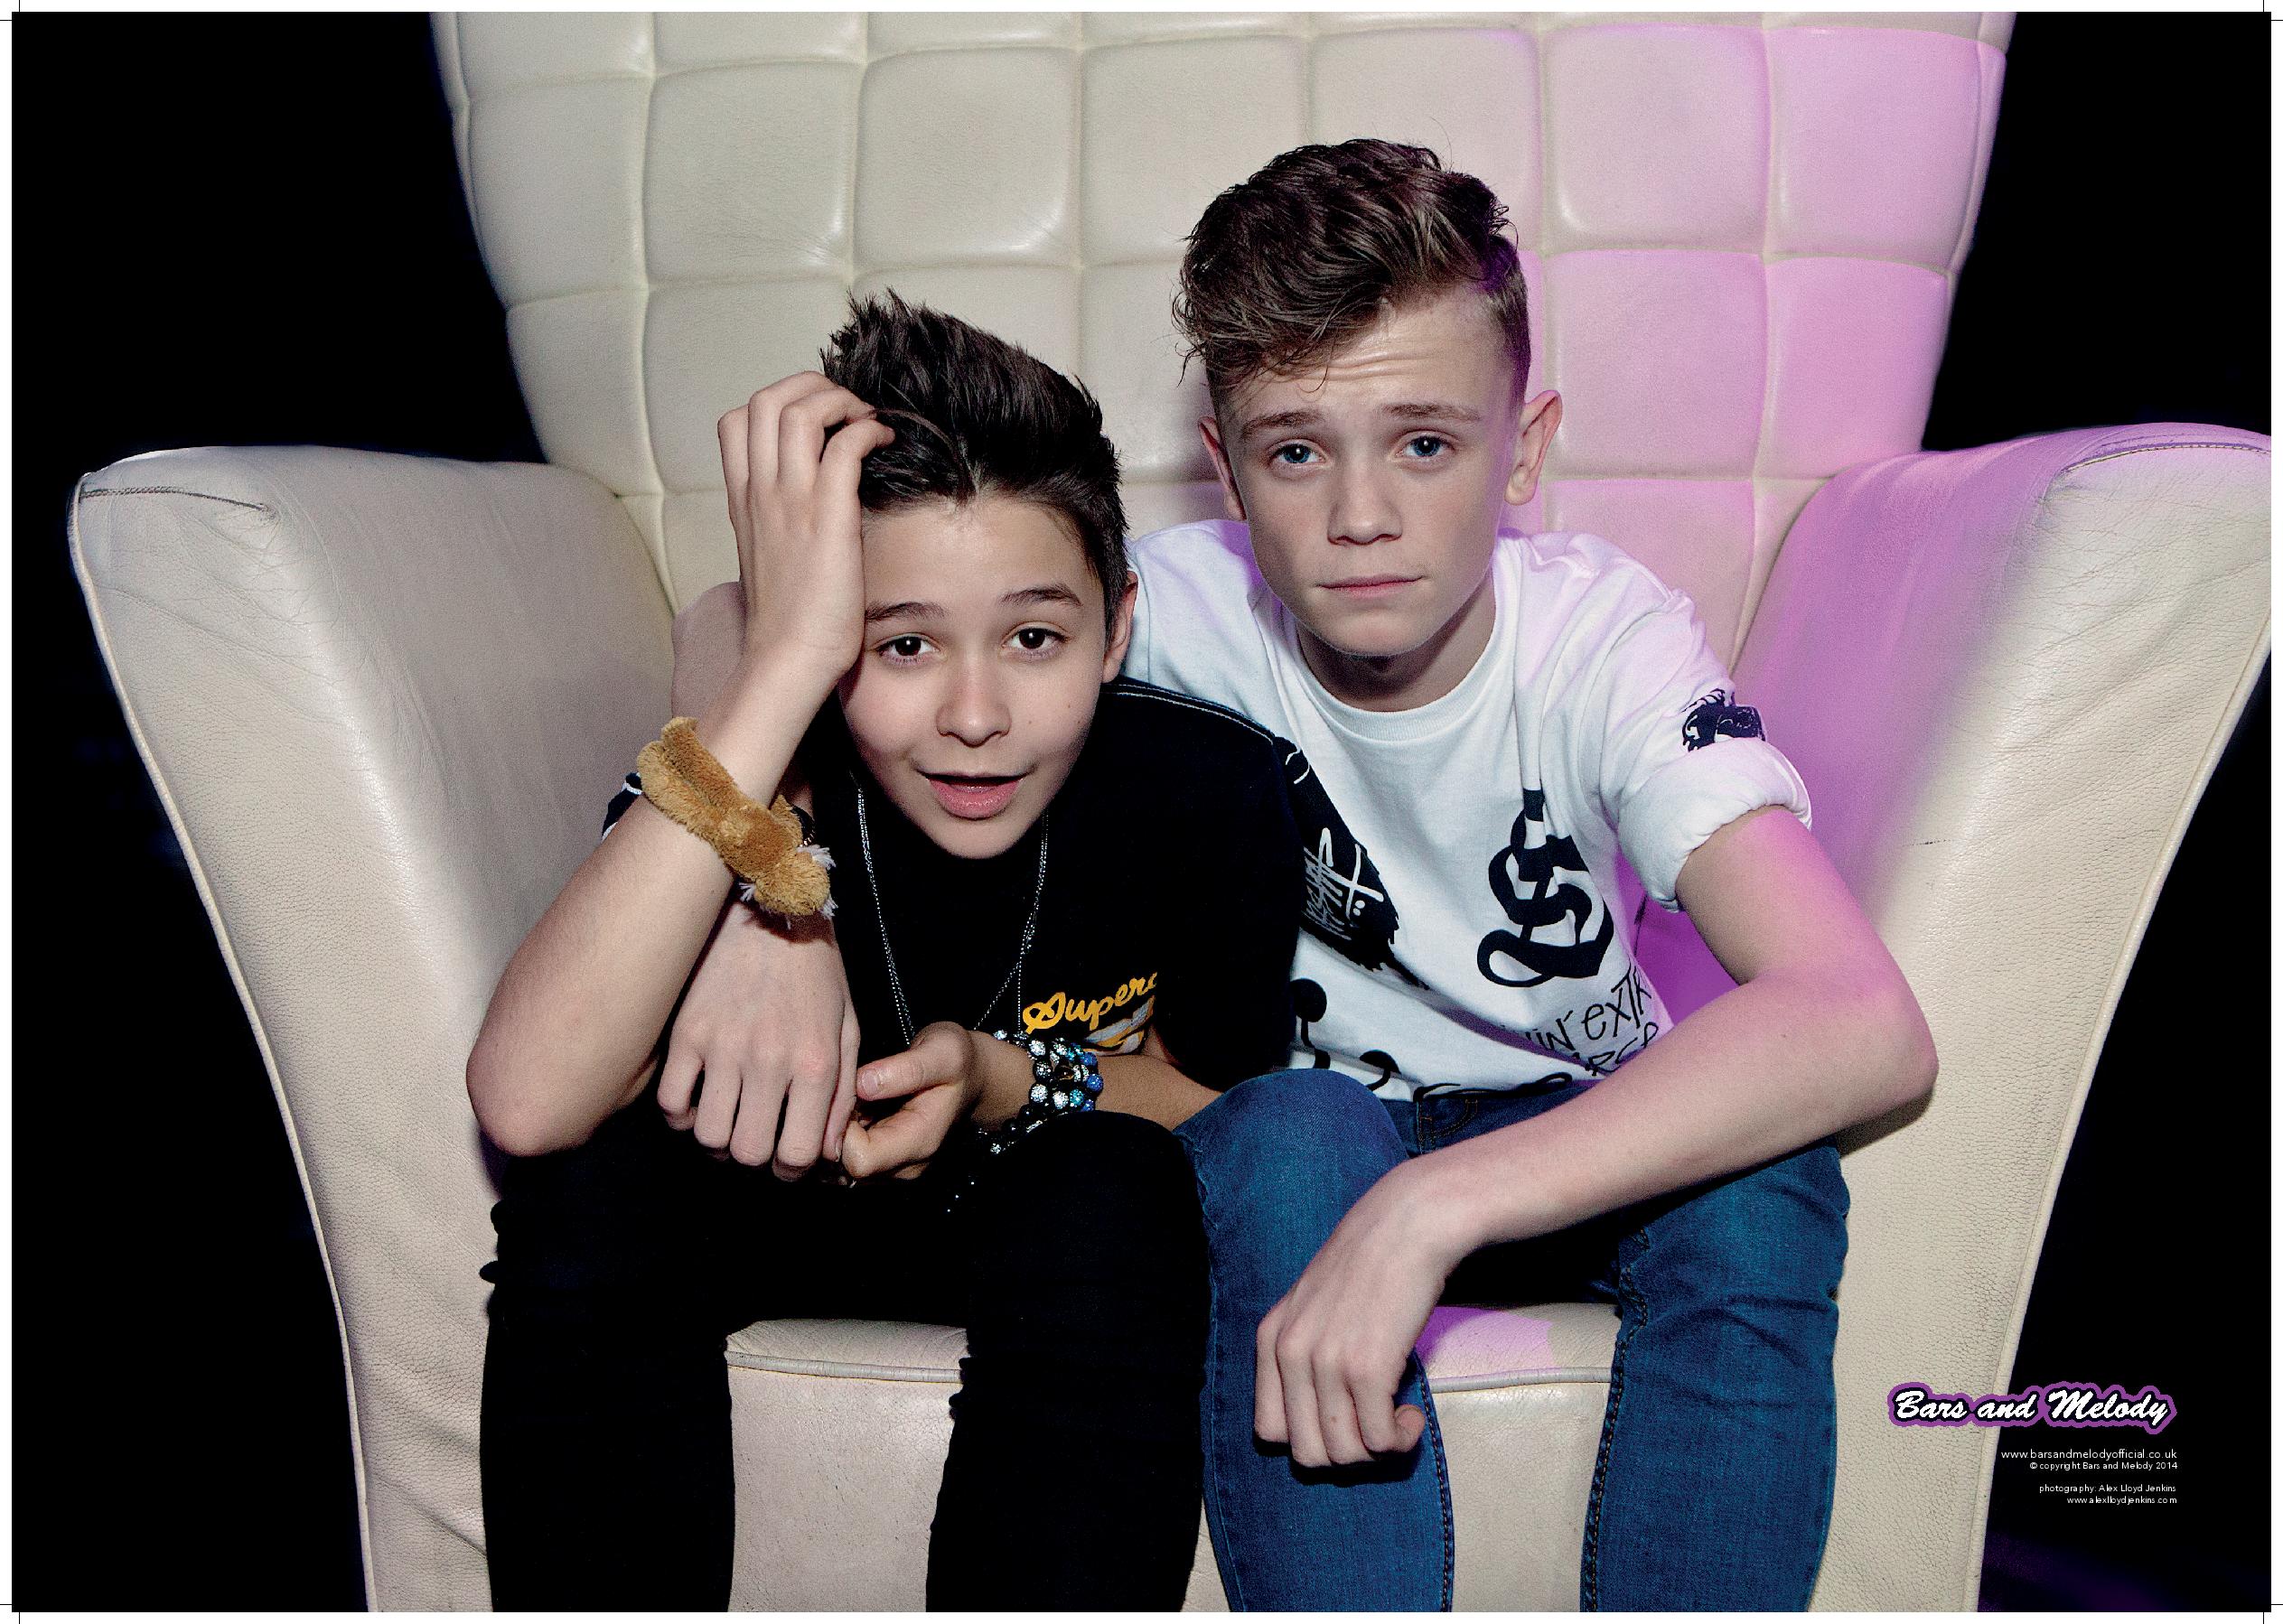 SIGNINGS: Bars & Melody to visit a mammoth 19 HMV stores • Pop Scoop